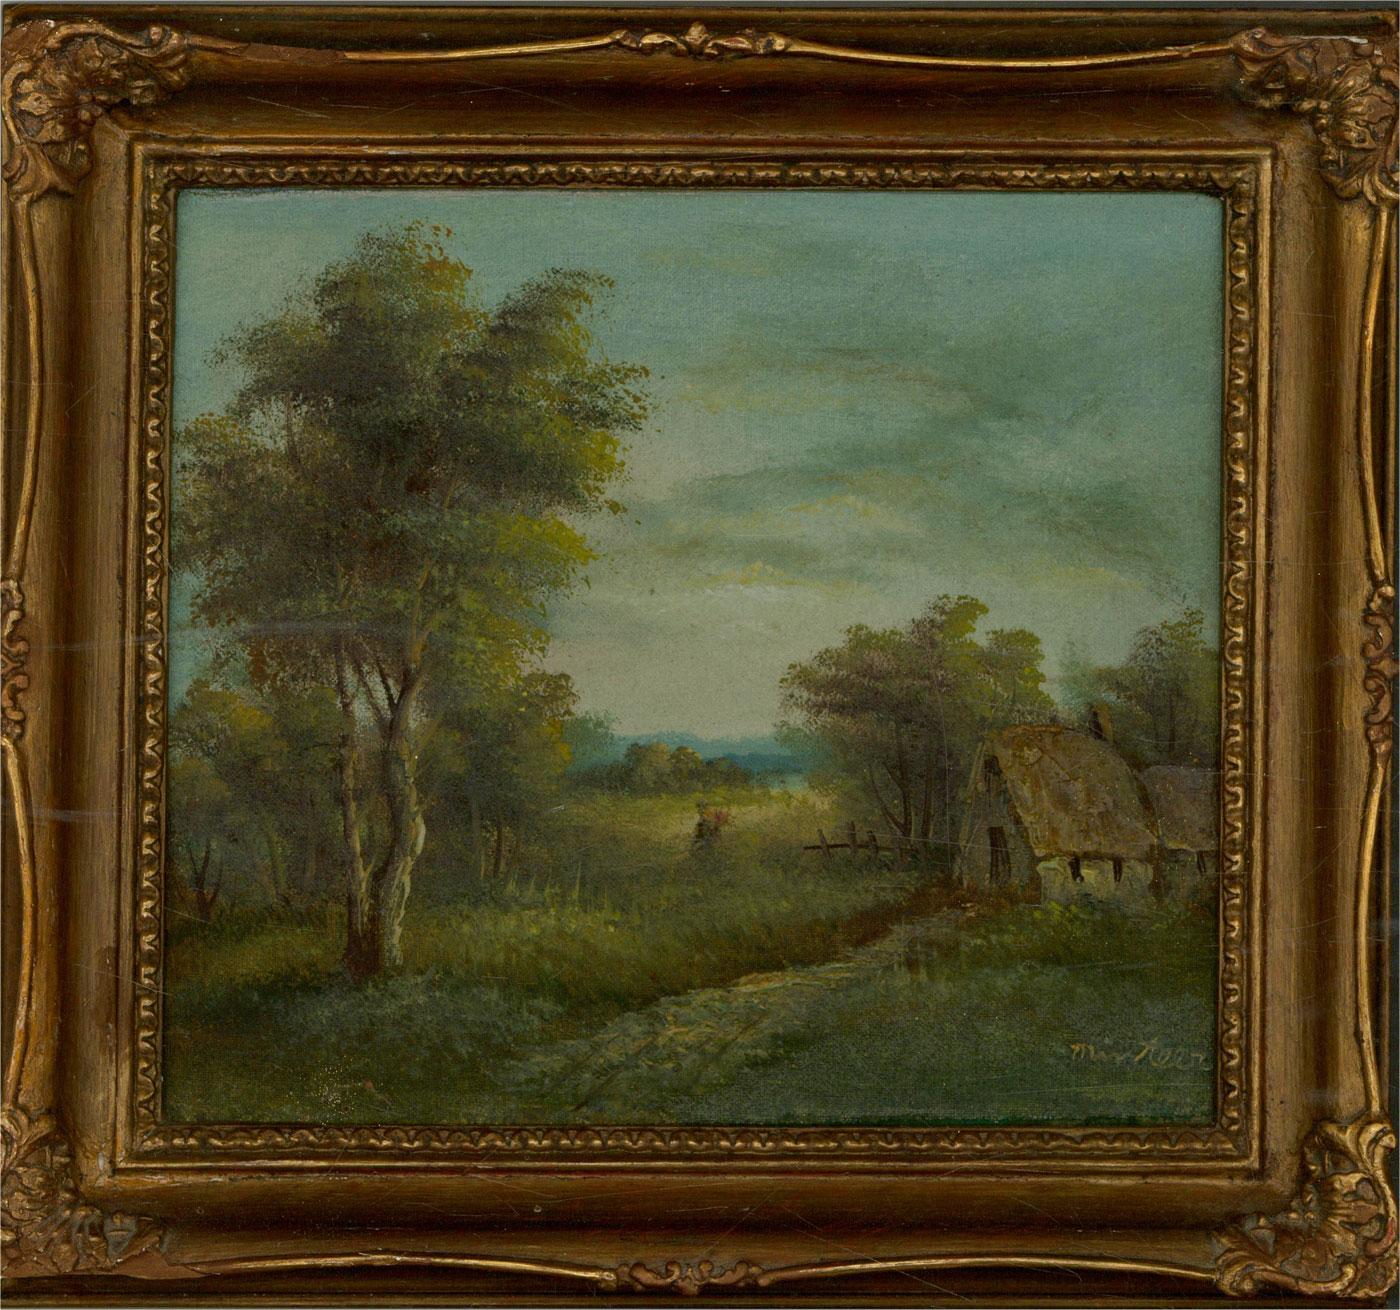 Unknown Landscape Painting - Framed Mid 20th Century Oil - Old Farm